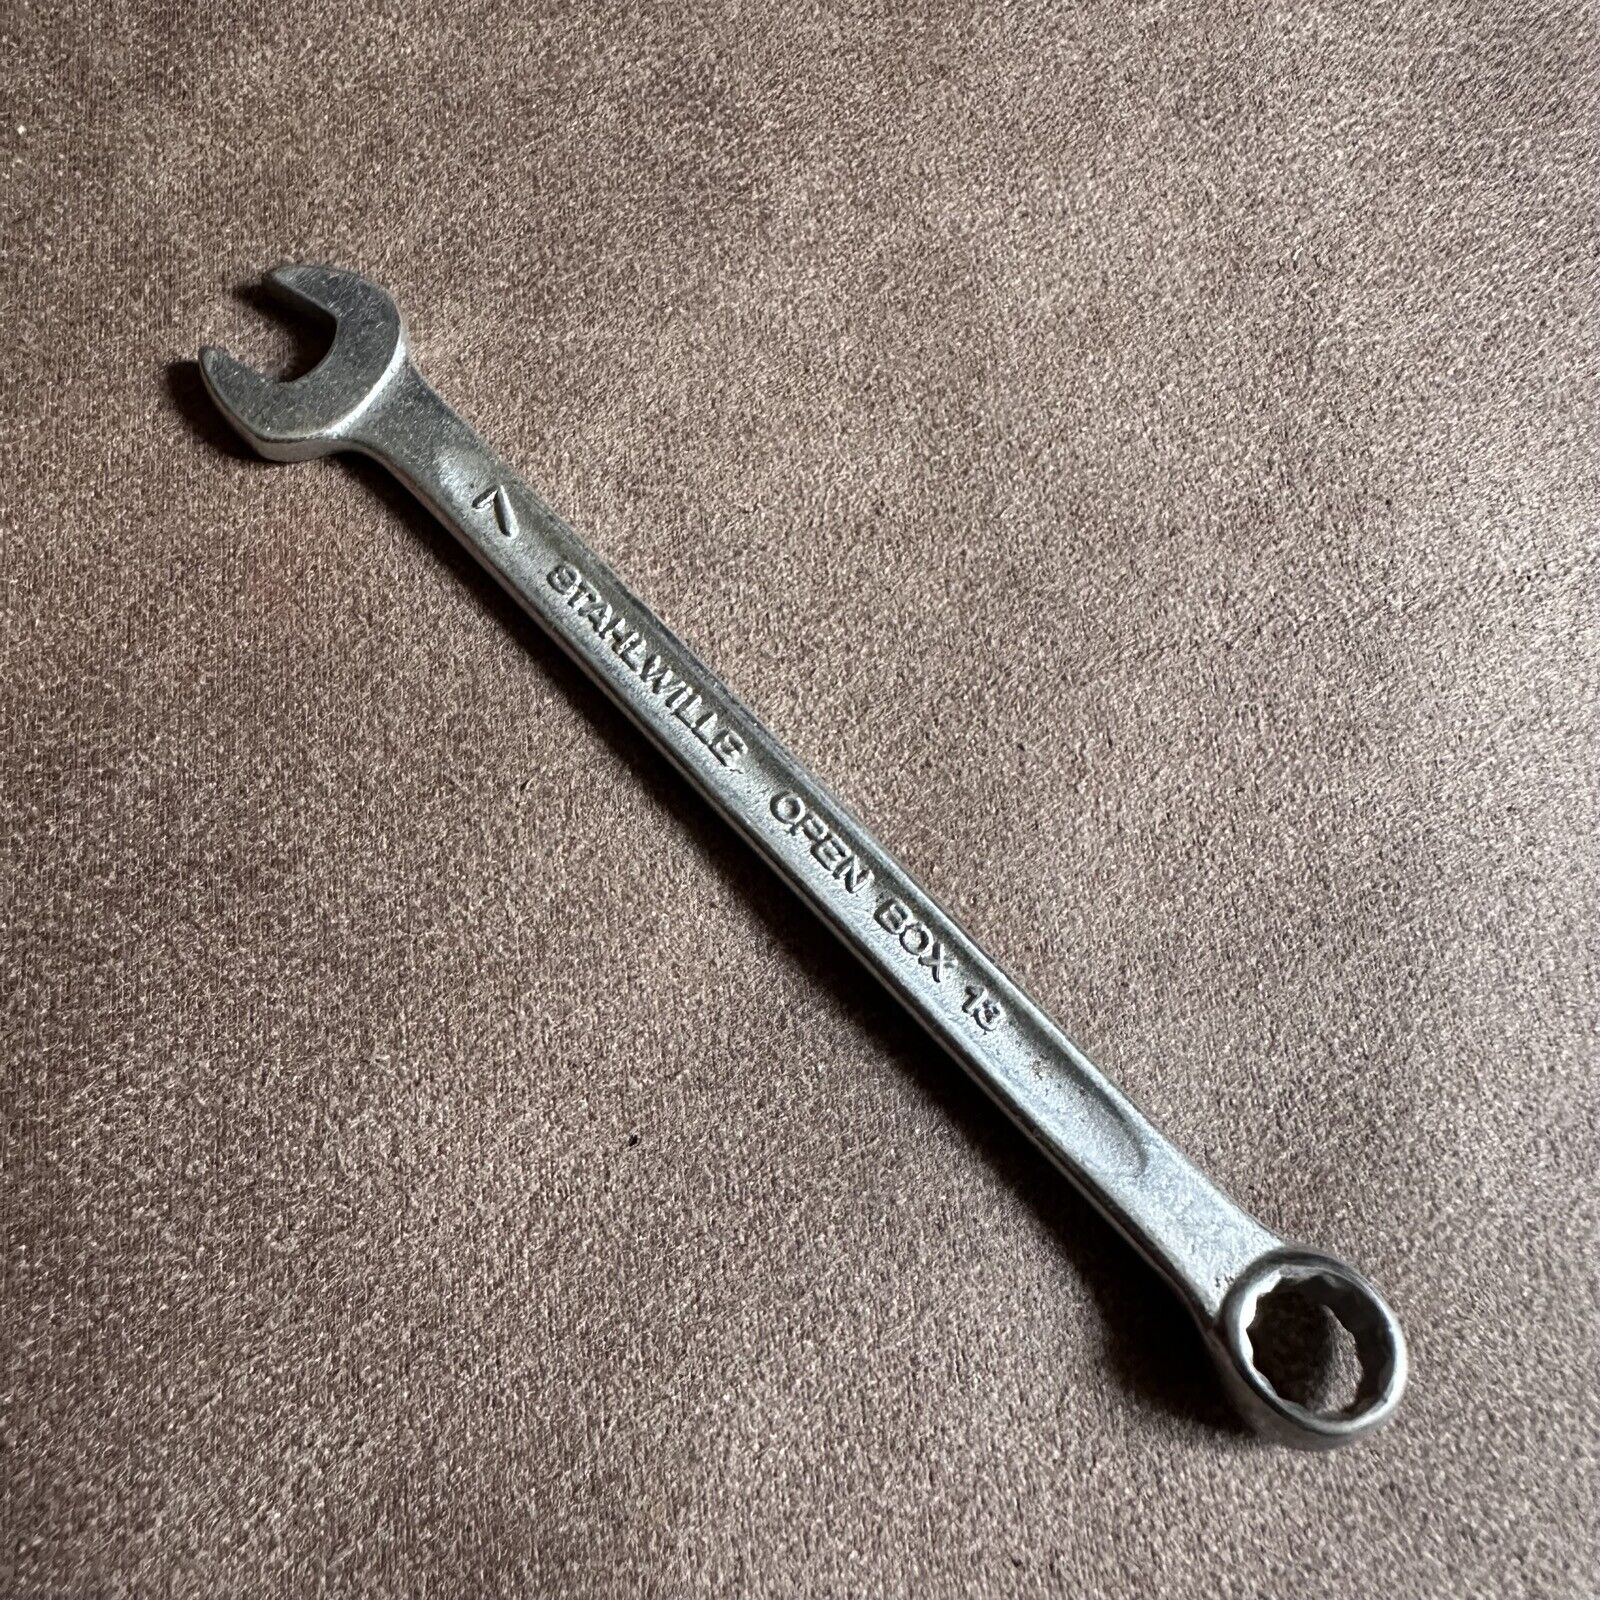 VINTAGE STAHLWILLE 7MM METRIC OPEN BOX COMBINATION RING OPEN SPANNER GERMANY